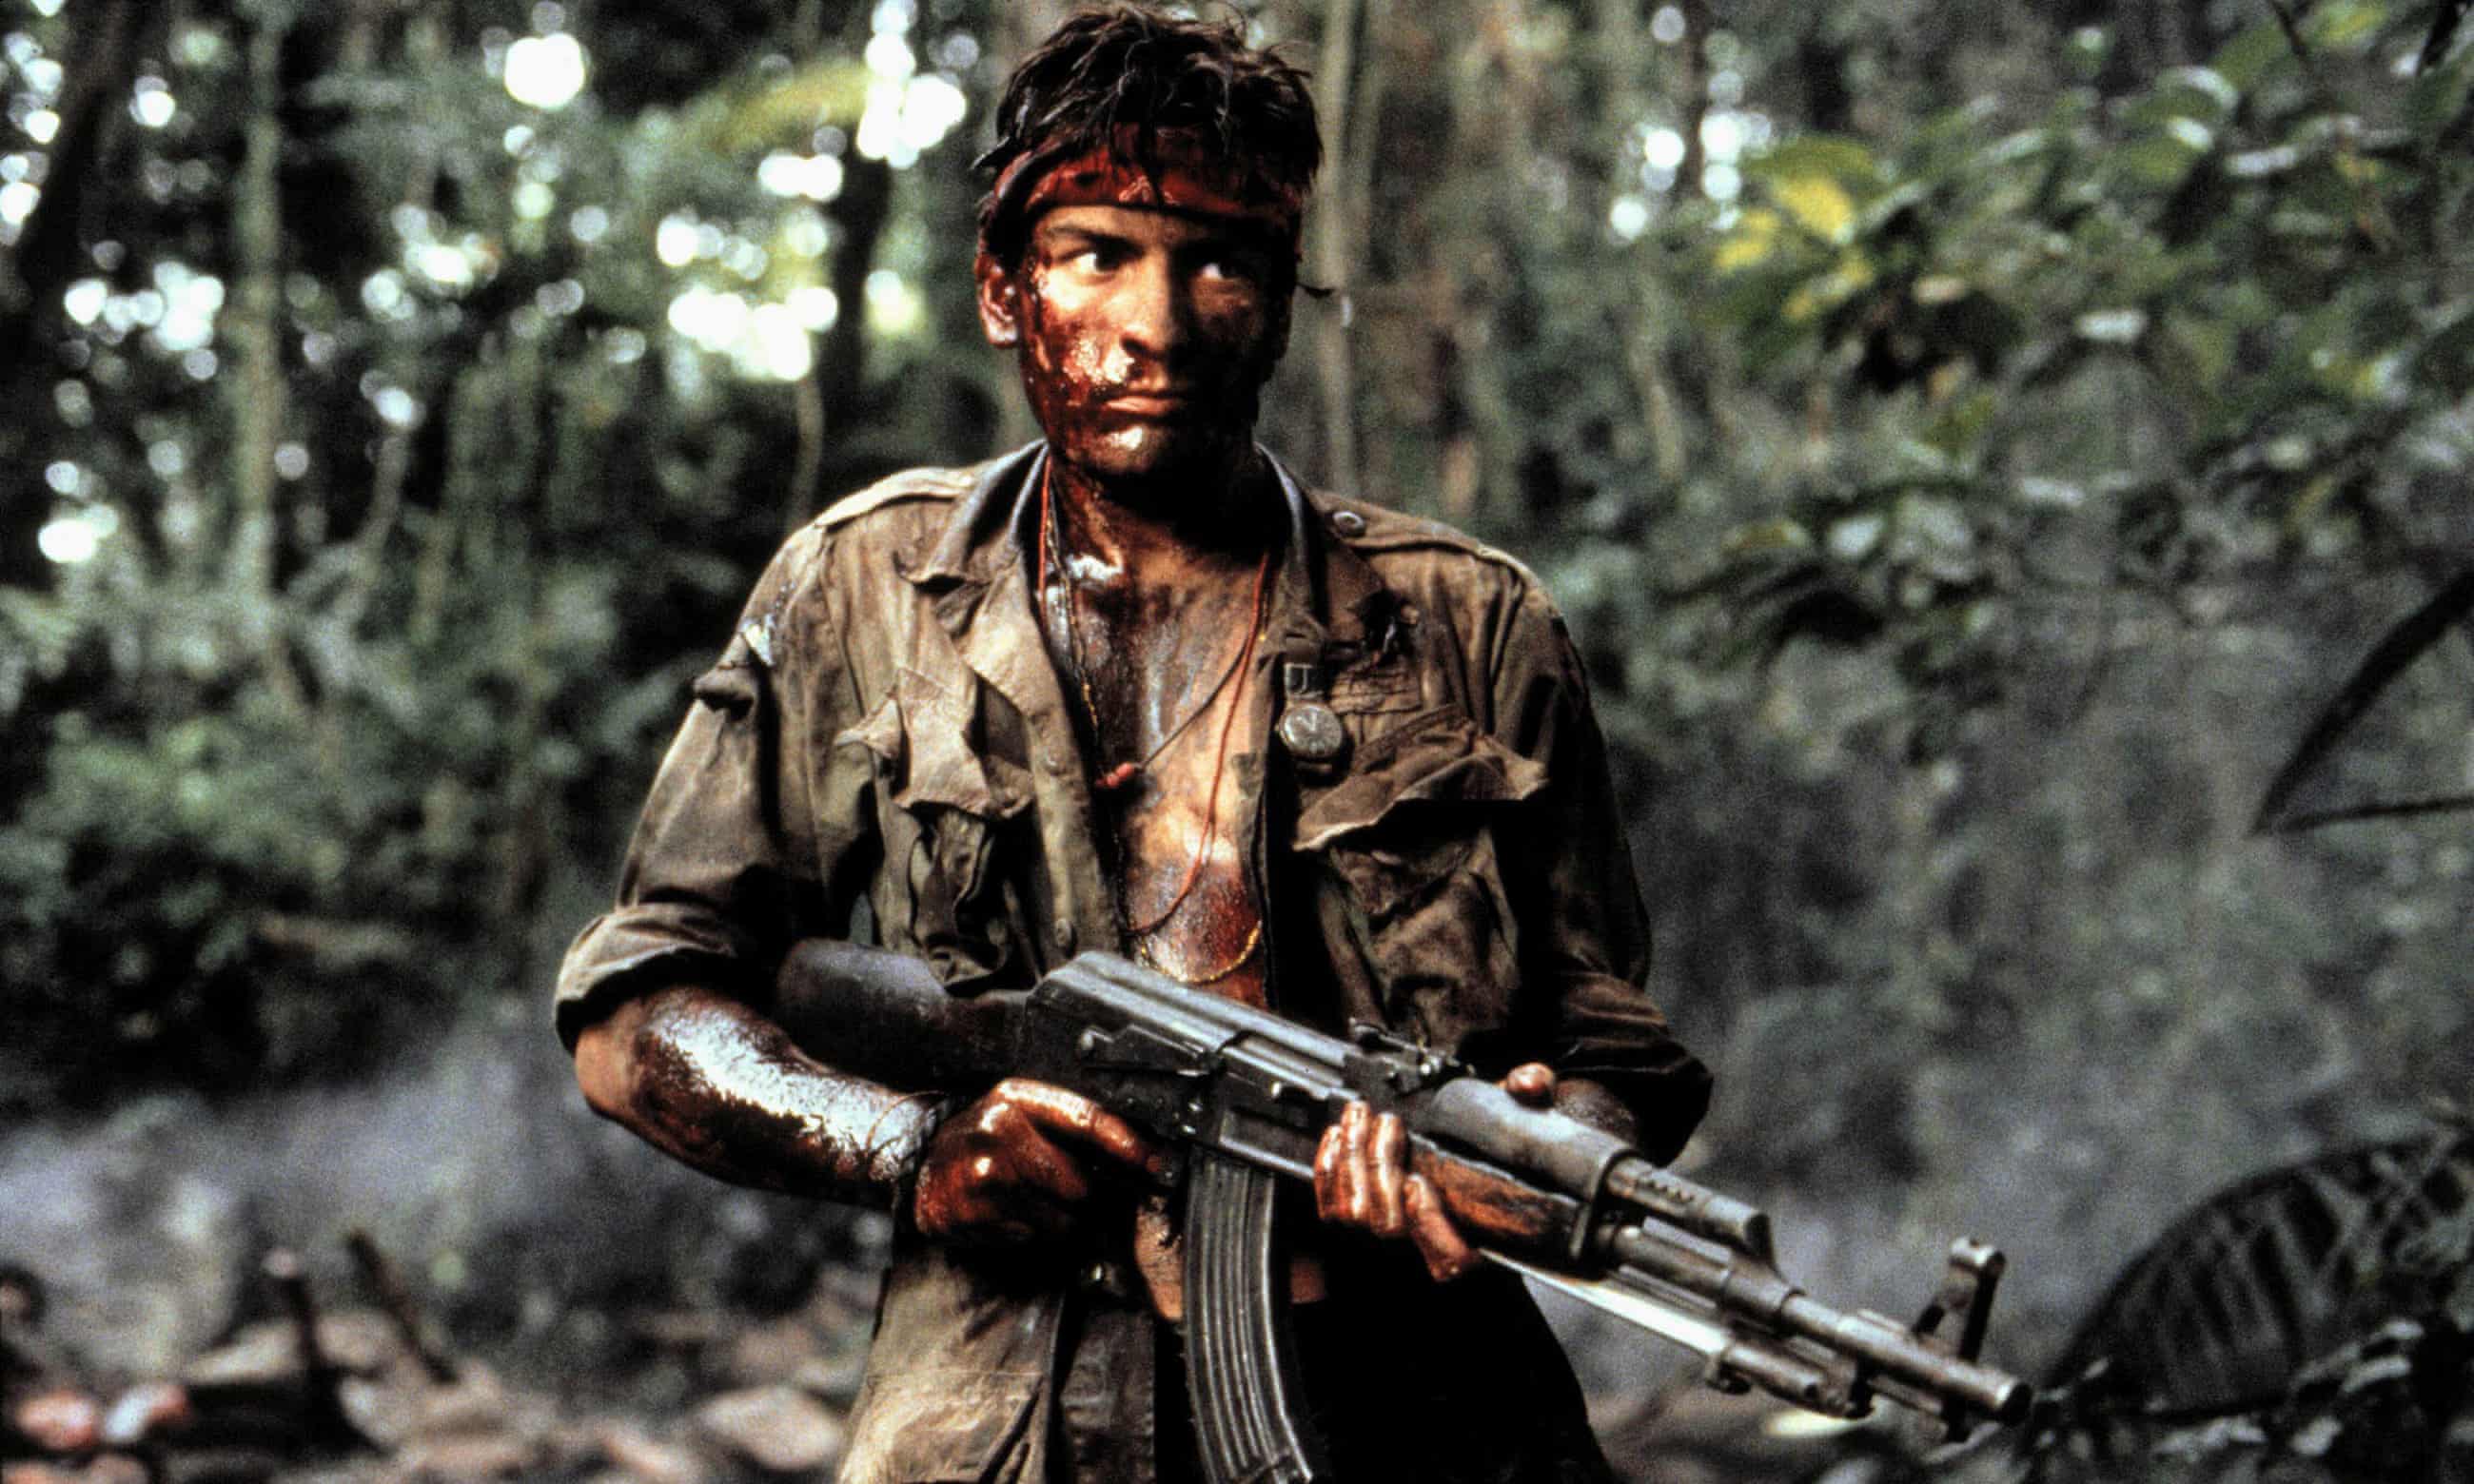 Charley Sheen in the movie platoon with an early Type 56 with milled receiver. Photograph: Cinetext/Mgm/Allstar